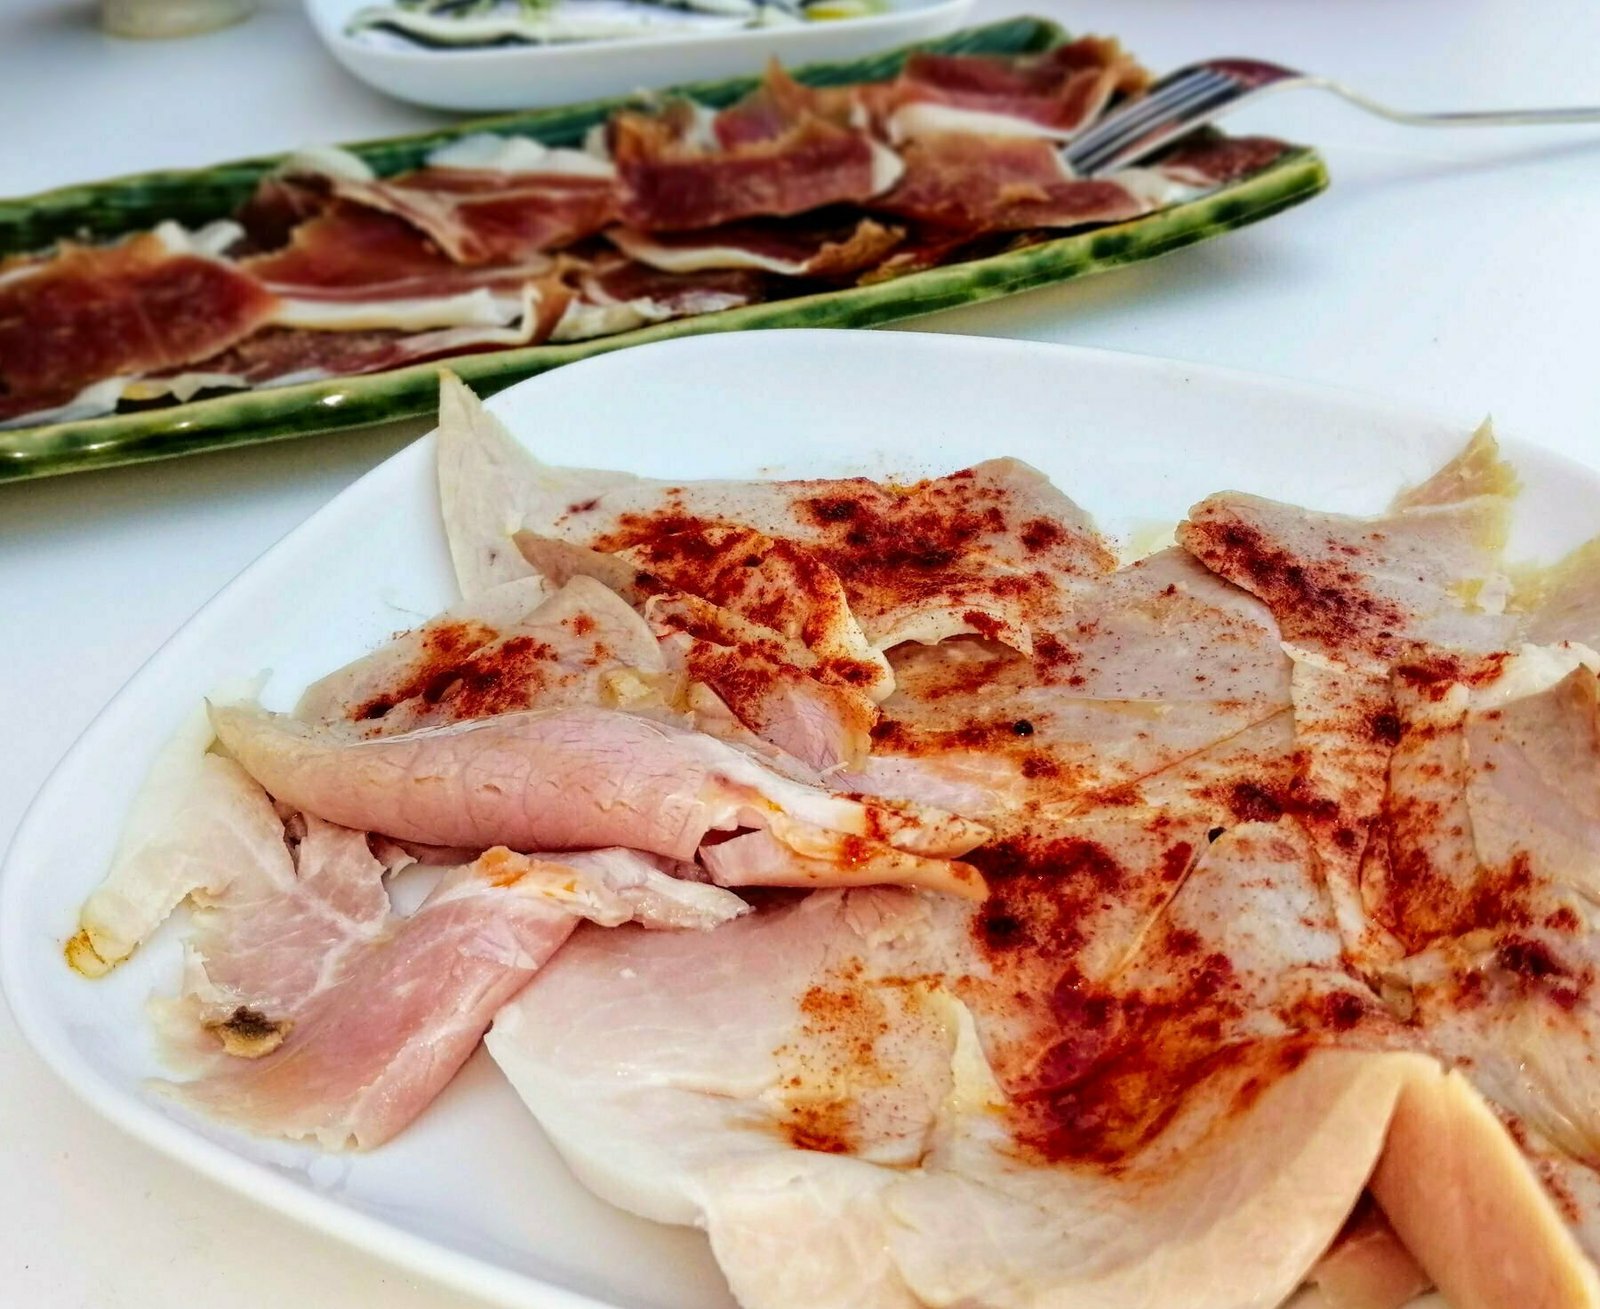 A plate of Lacón a la Gallegasits on a table with a small plate of jamon iberico in the background